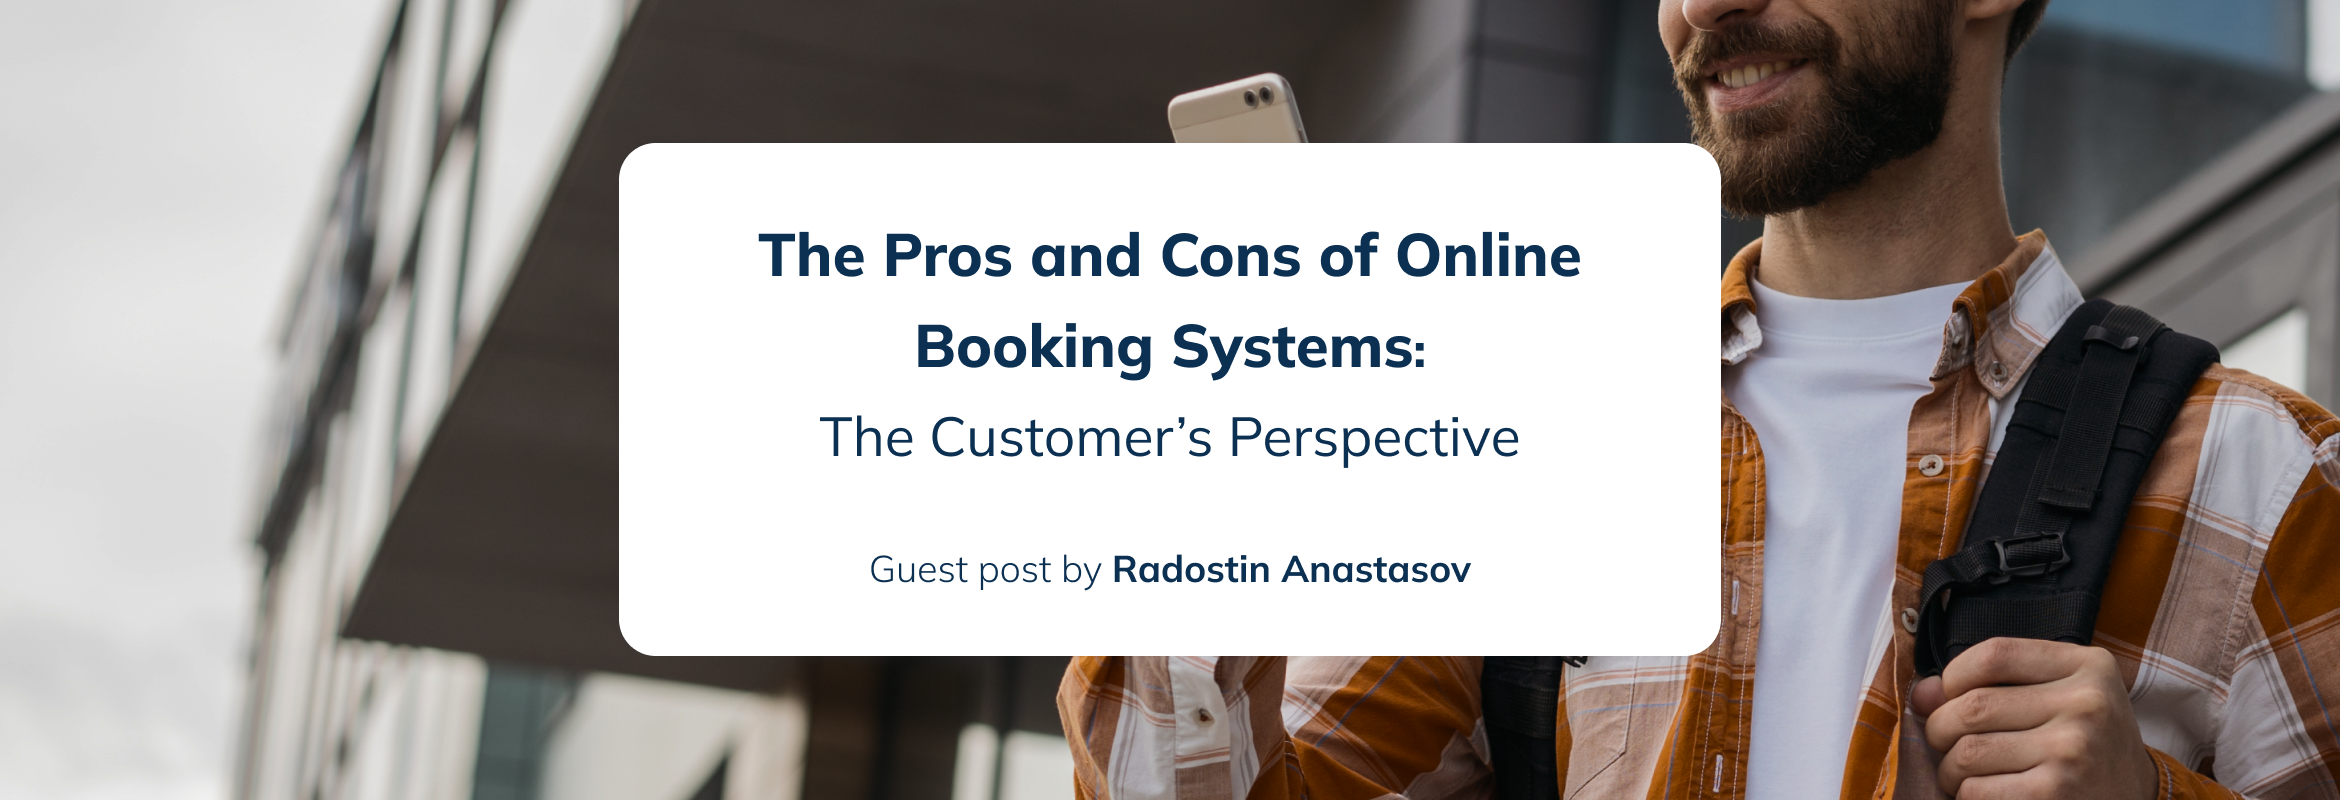 the pros and cons of online booking systems